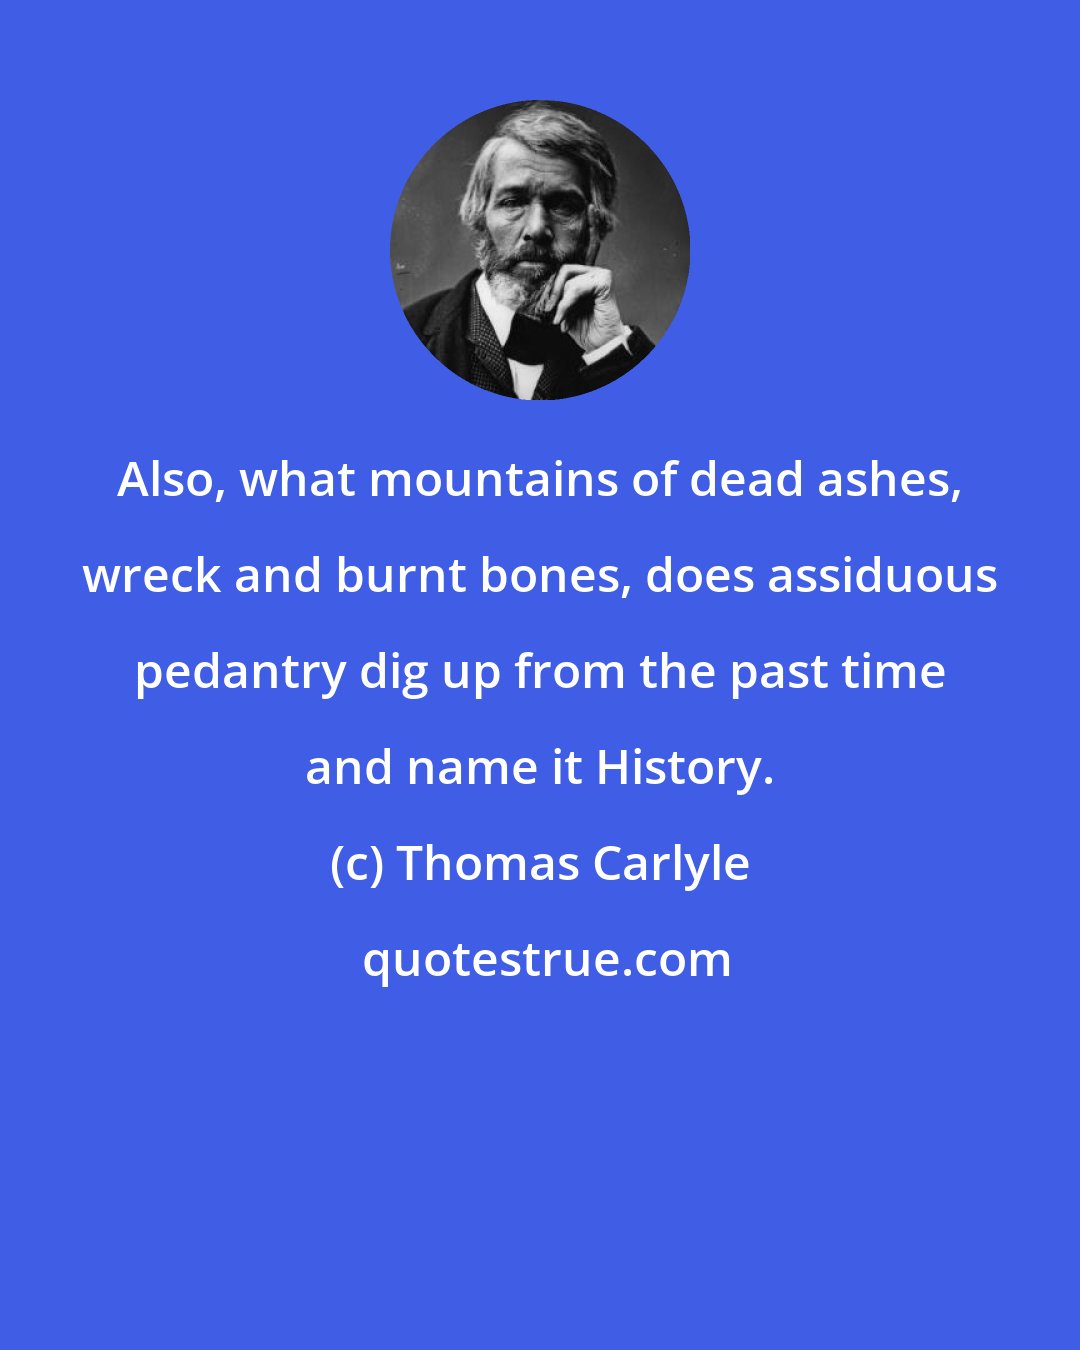 Thomas Carlyle: Also, what mountains of dead ashes, wreck and burnt bones, does assiduous pedantry dig up from the past time and name it History.